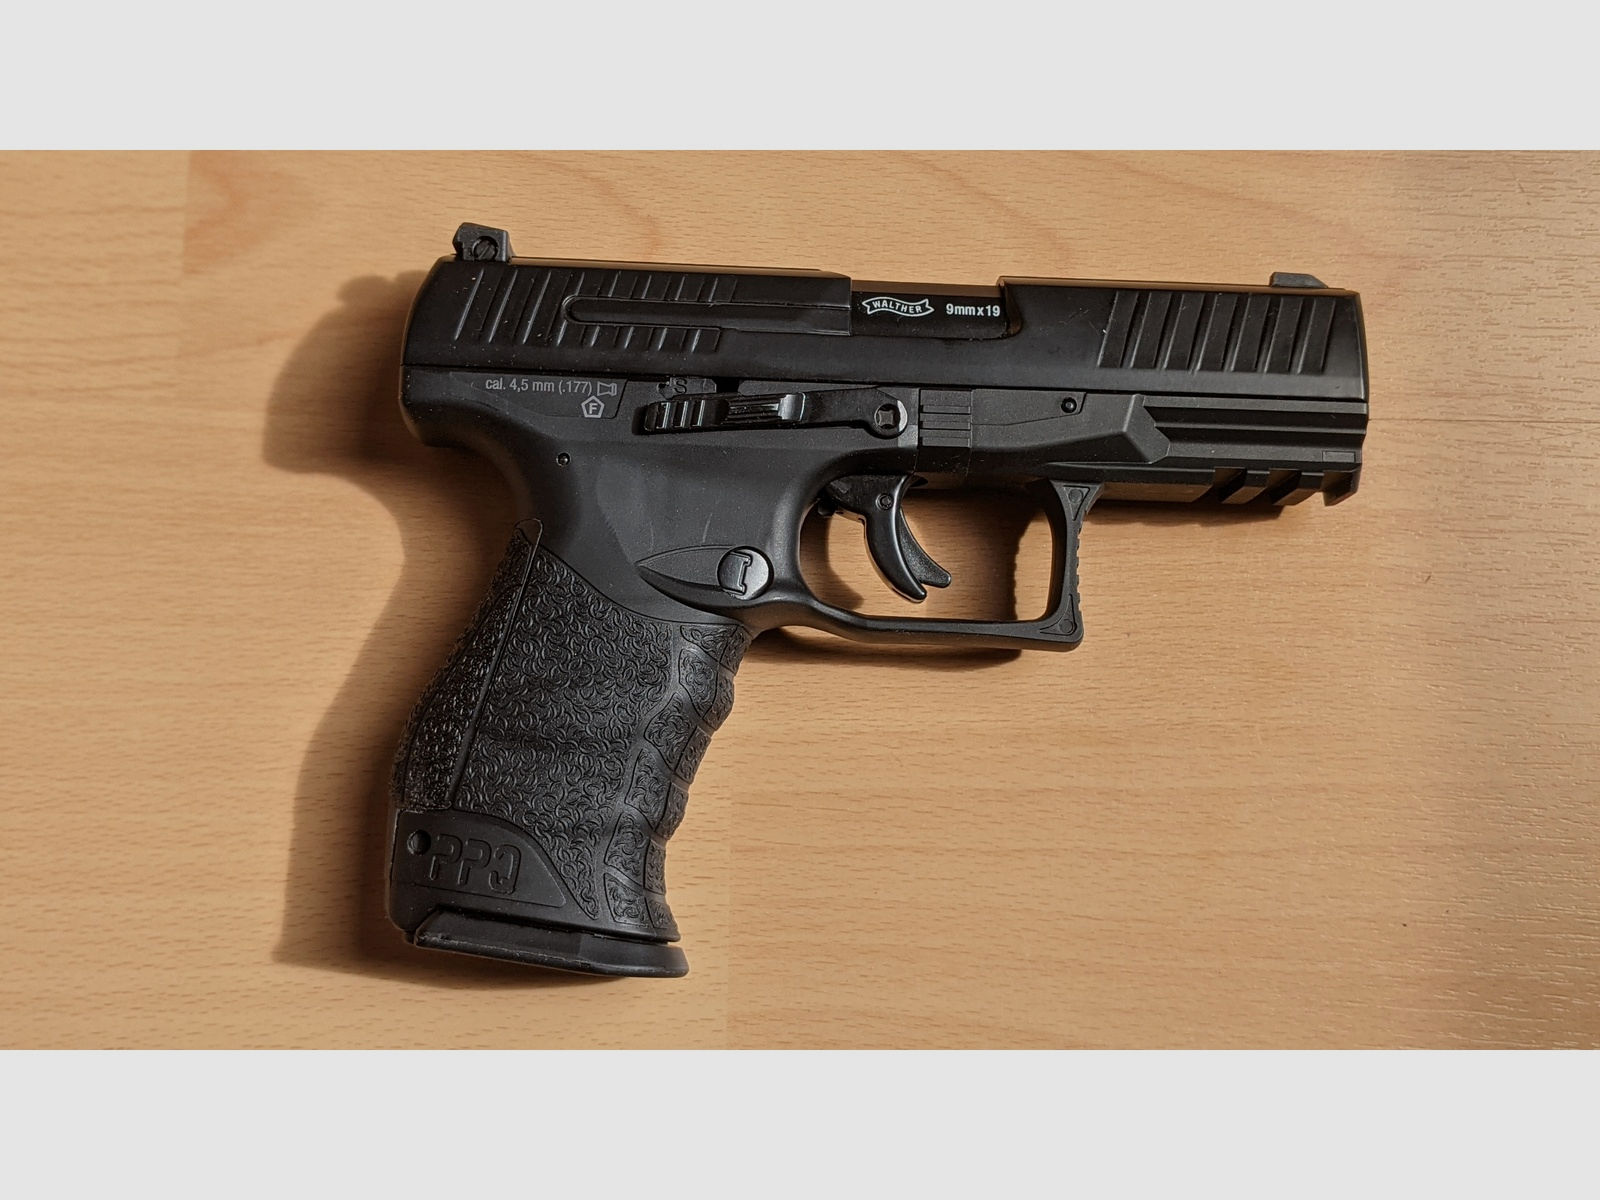  Walther PPQ M2 CO2 Pistole 4,5mm